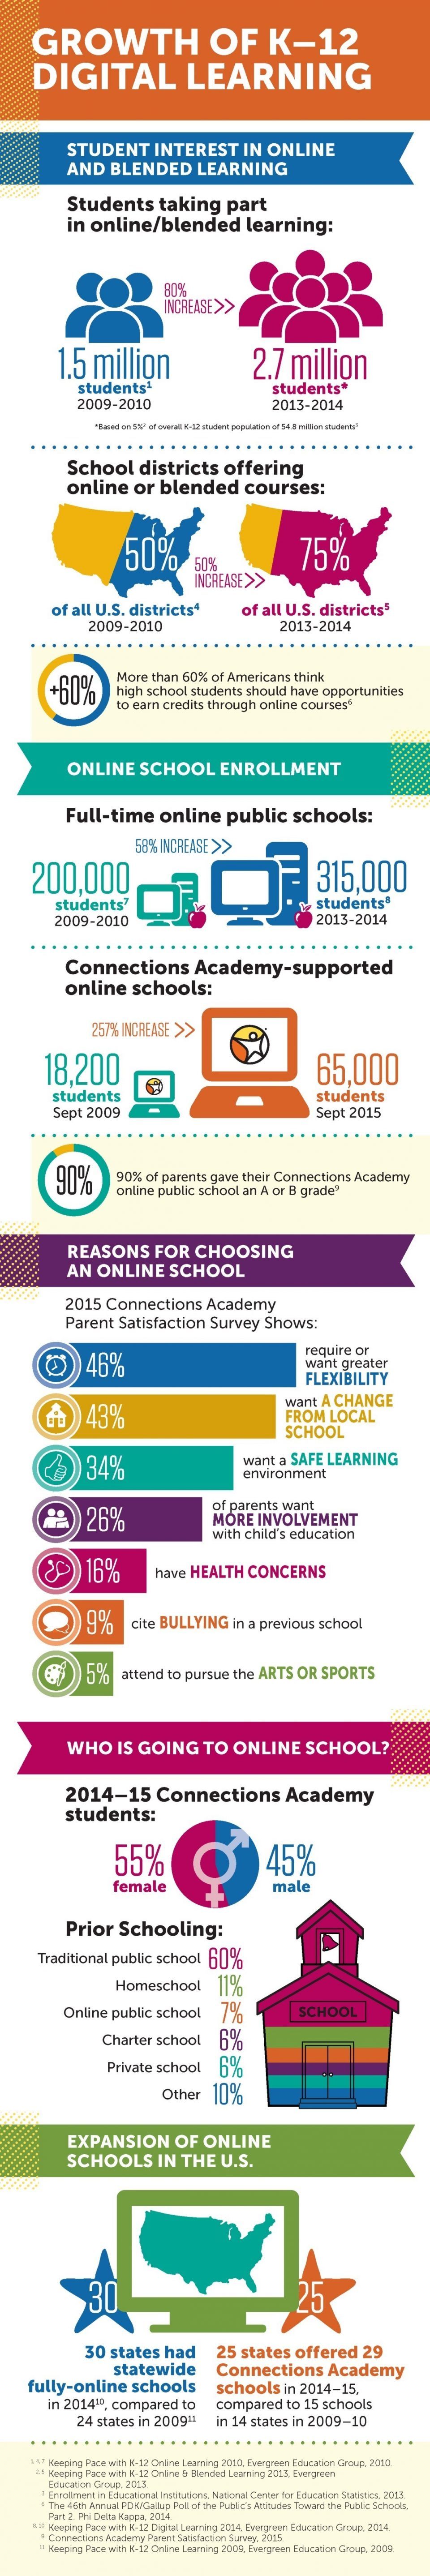 Growth of K12 Digital Learning Infographic